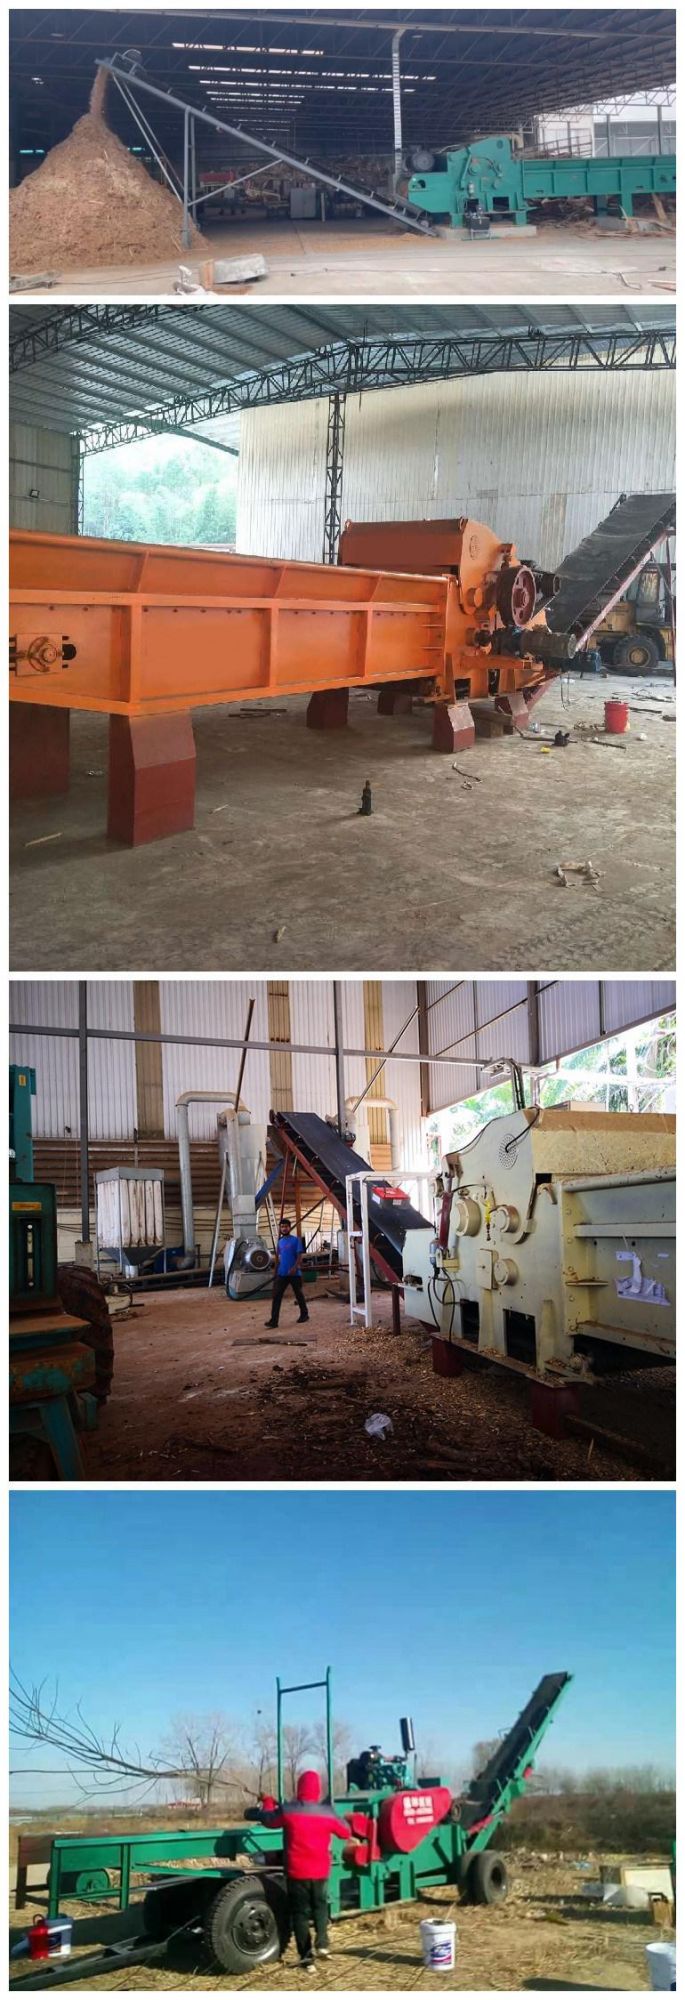 Shd High Performance and High Yield Large Integrated Wood Crusher with Cheap Price